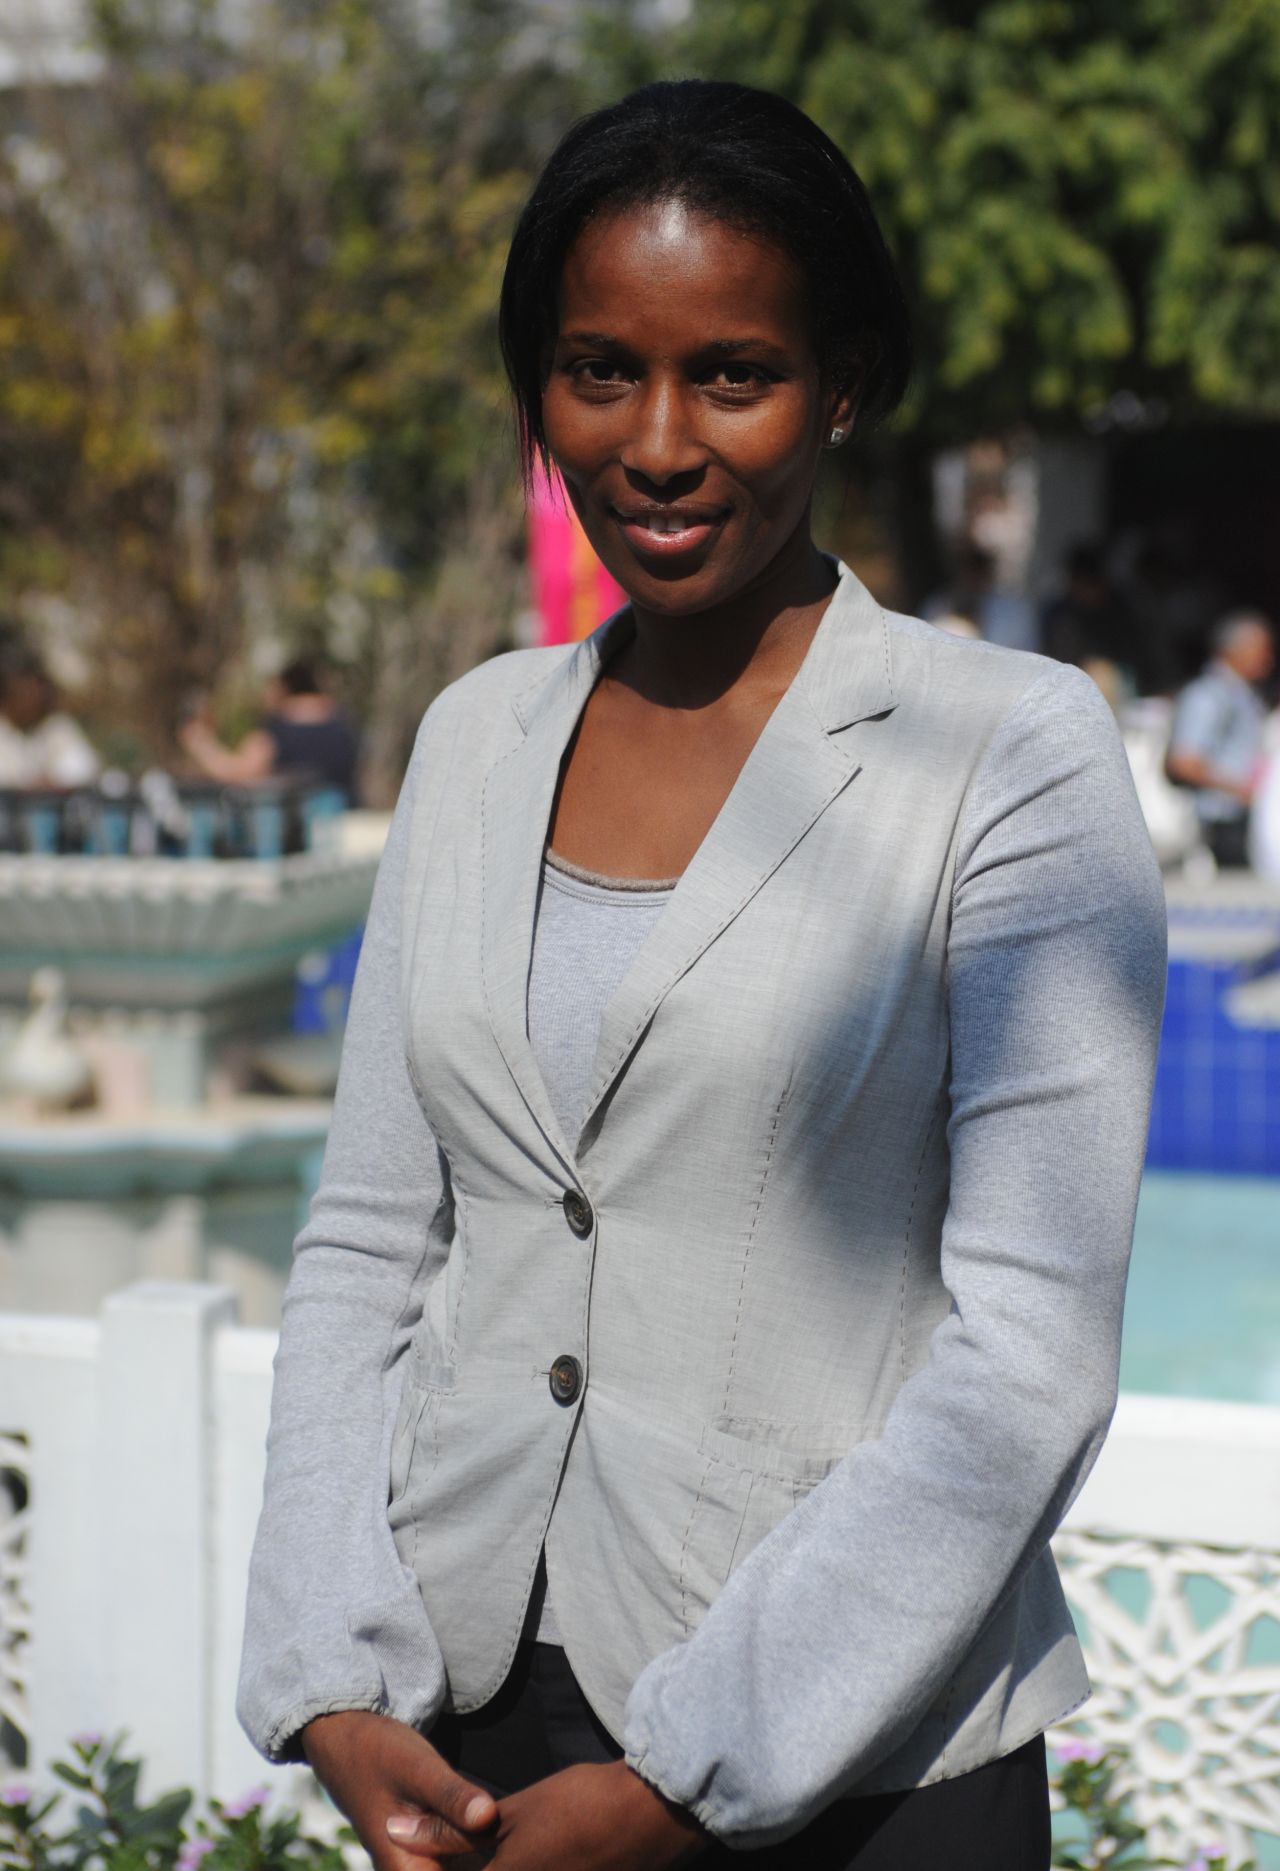 Brandeis University decided <a href="http://www.nytimes.com/2014/04/09/us/brandeis-cancels-plan-to-give-honorary-degree-to-ayaan-hirsi-ali-a-critic-of-islam.html?_r=0" target="_blank" target="_blank">not to give an honorary degree</a> to Ayaan Hirsi Ali, a Somali-born Dutch writer and fierce critic of Islam, after a Change.org petition attracted thousands of signatures. Ali was still invited to speak at the university, however. 